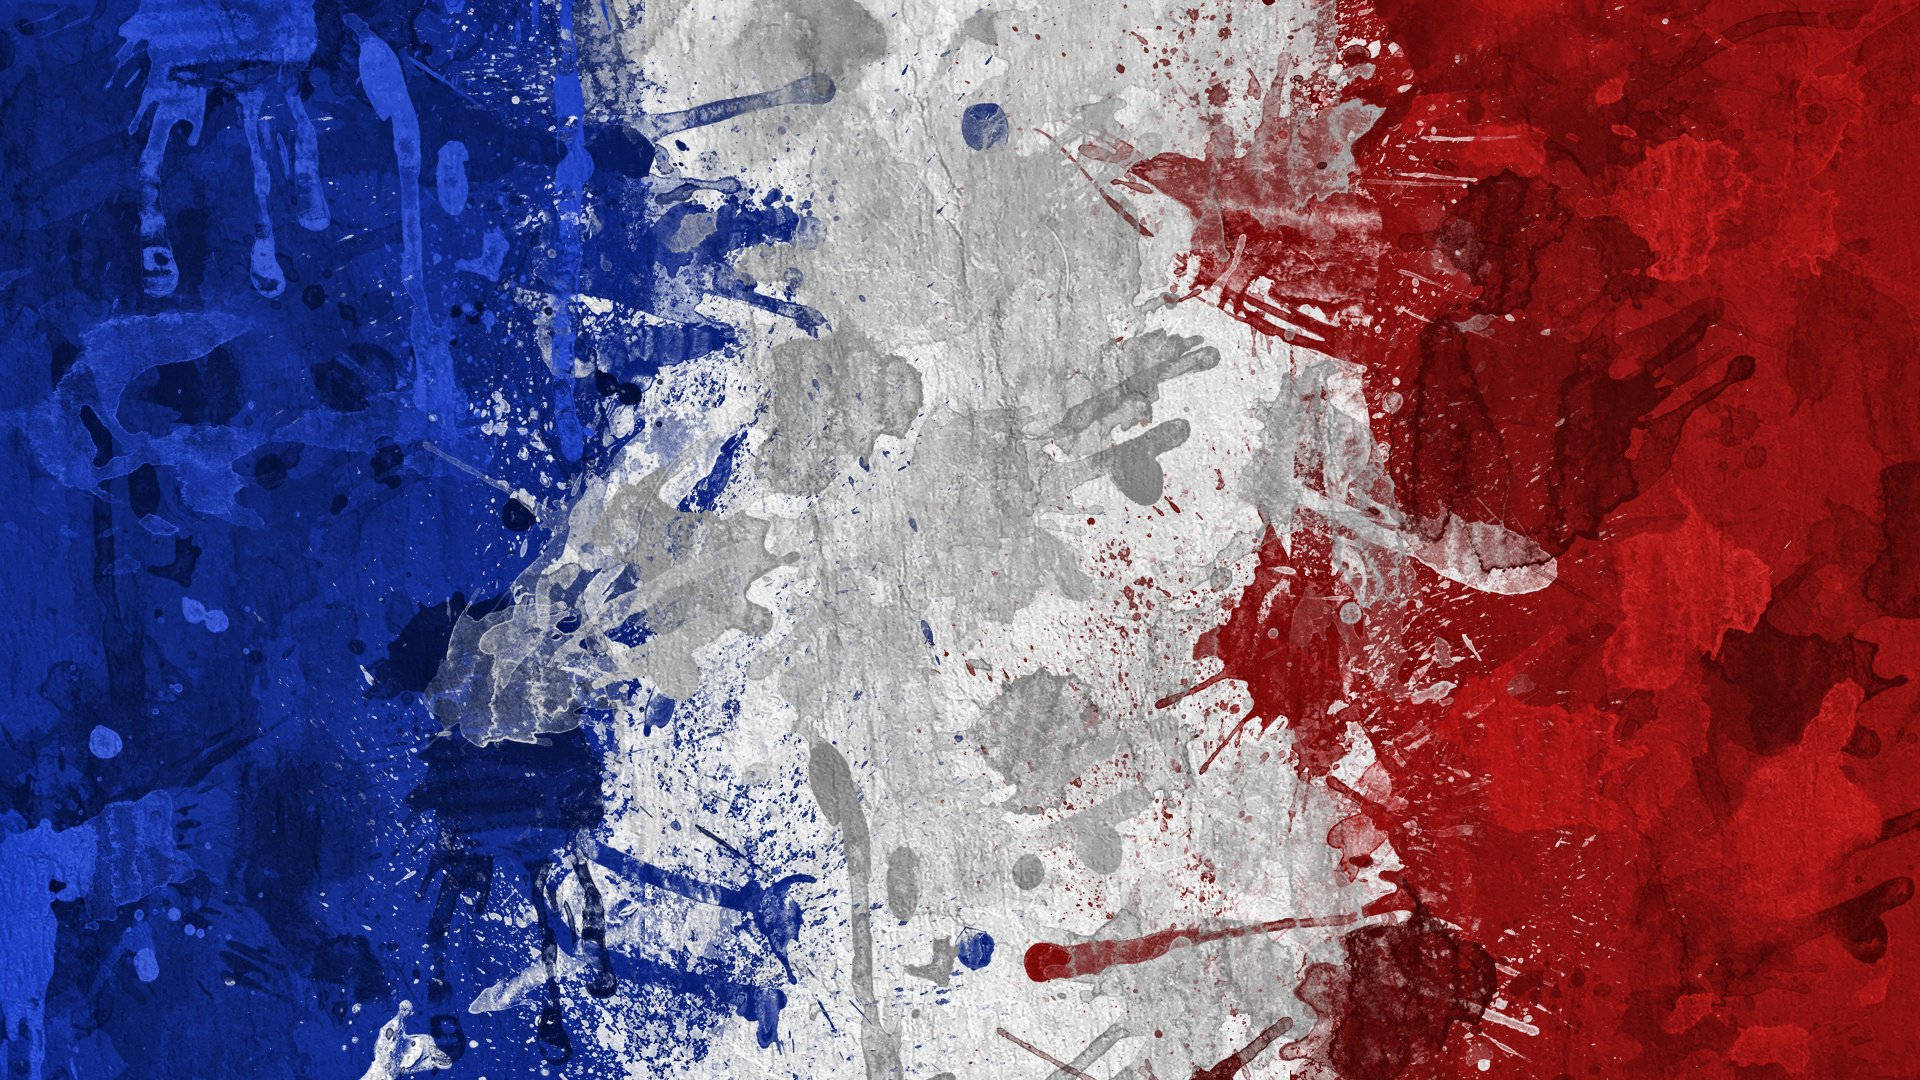 Artistic Representation Of The French Flag